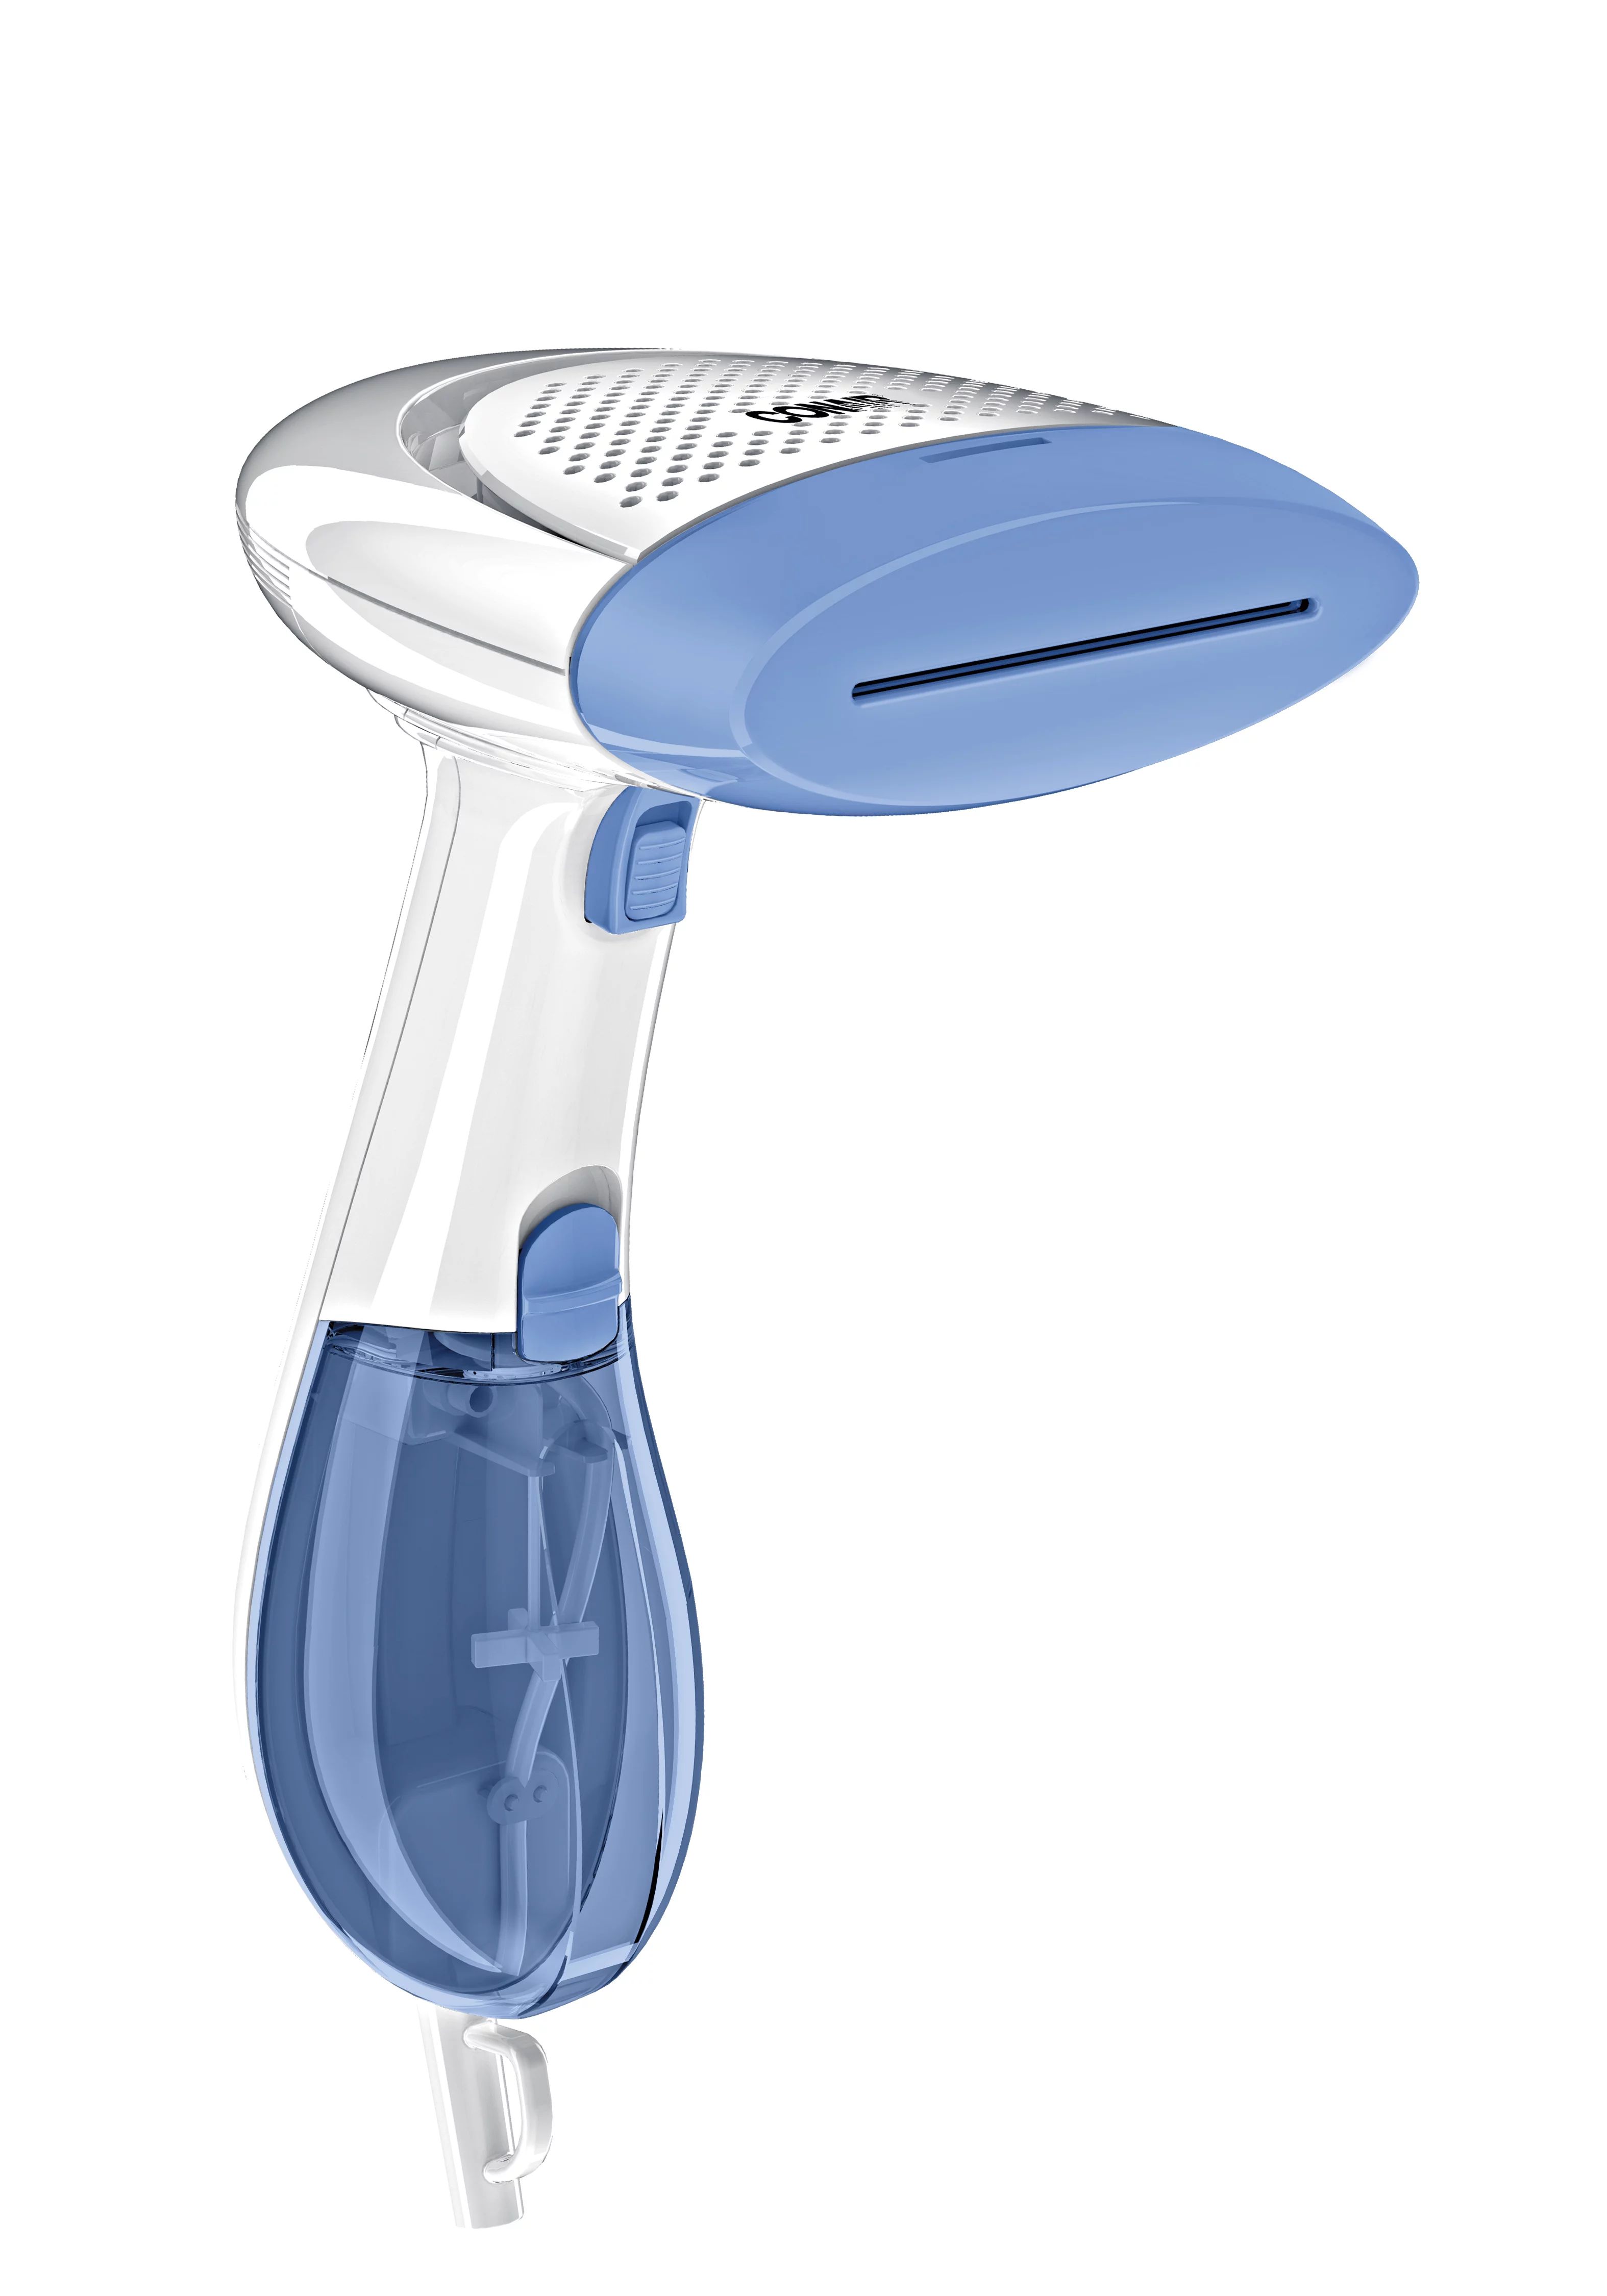 Conair ExtremeSteam Hand Held Fabric Steamer with Dual Heat, White/Blue, Model GS237X | Walmart (US)